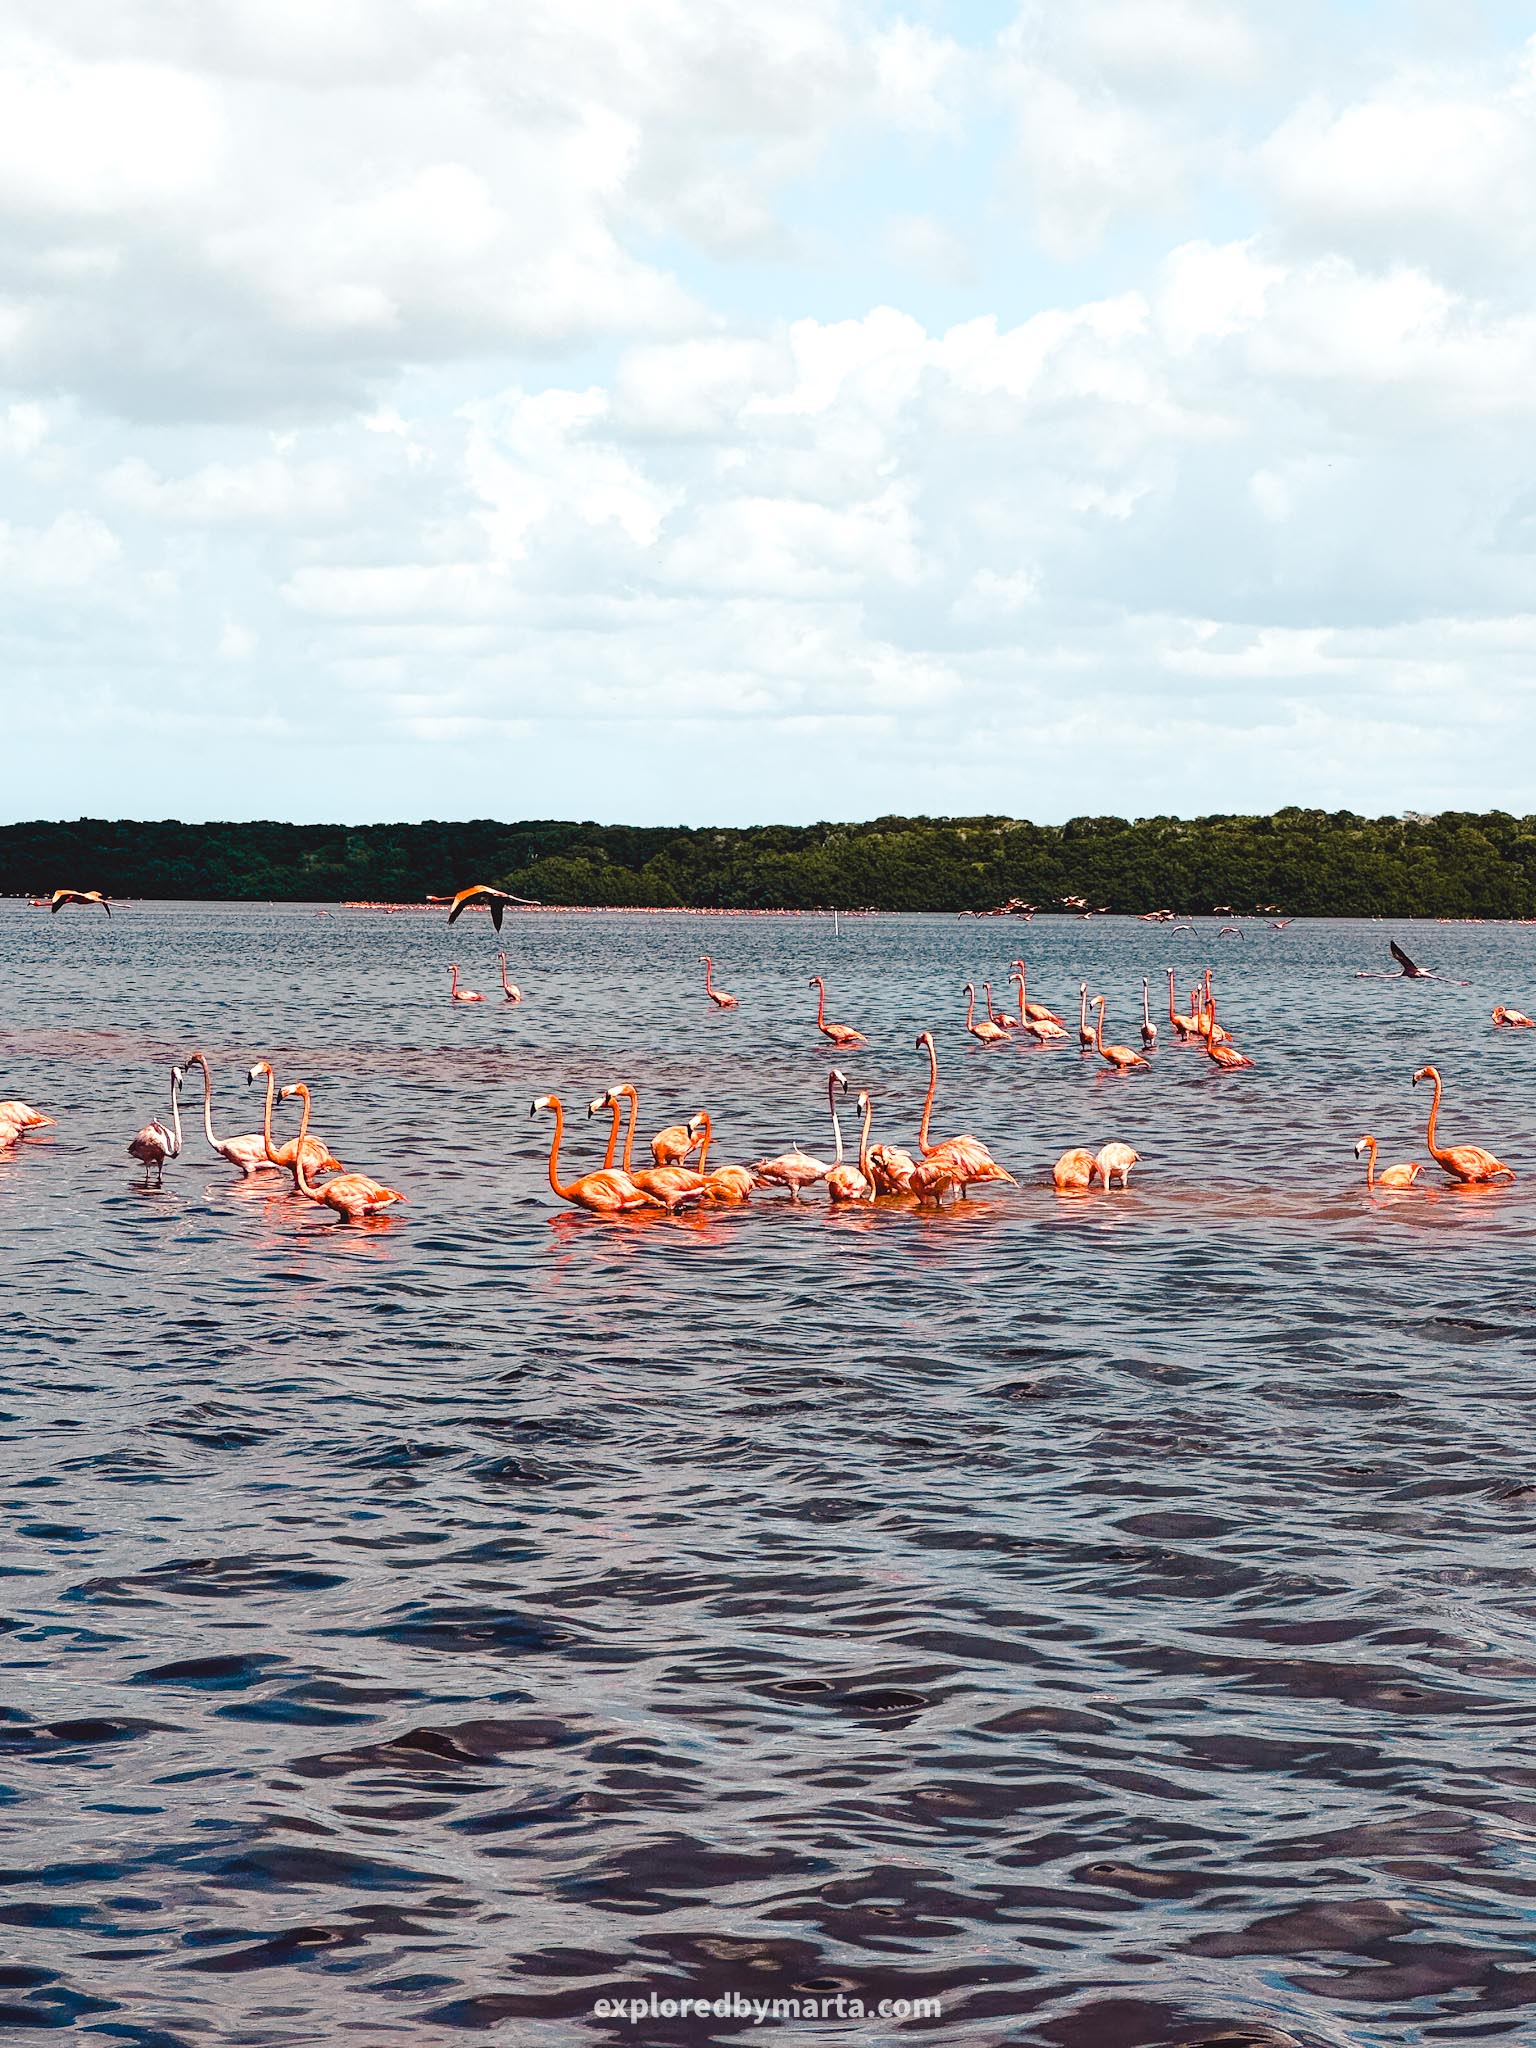 Merida, Mexico-one of the best things to do in Merida is to see pink flamingos in the wild in Celestún